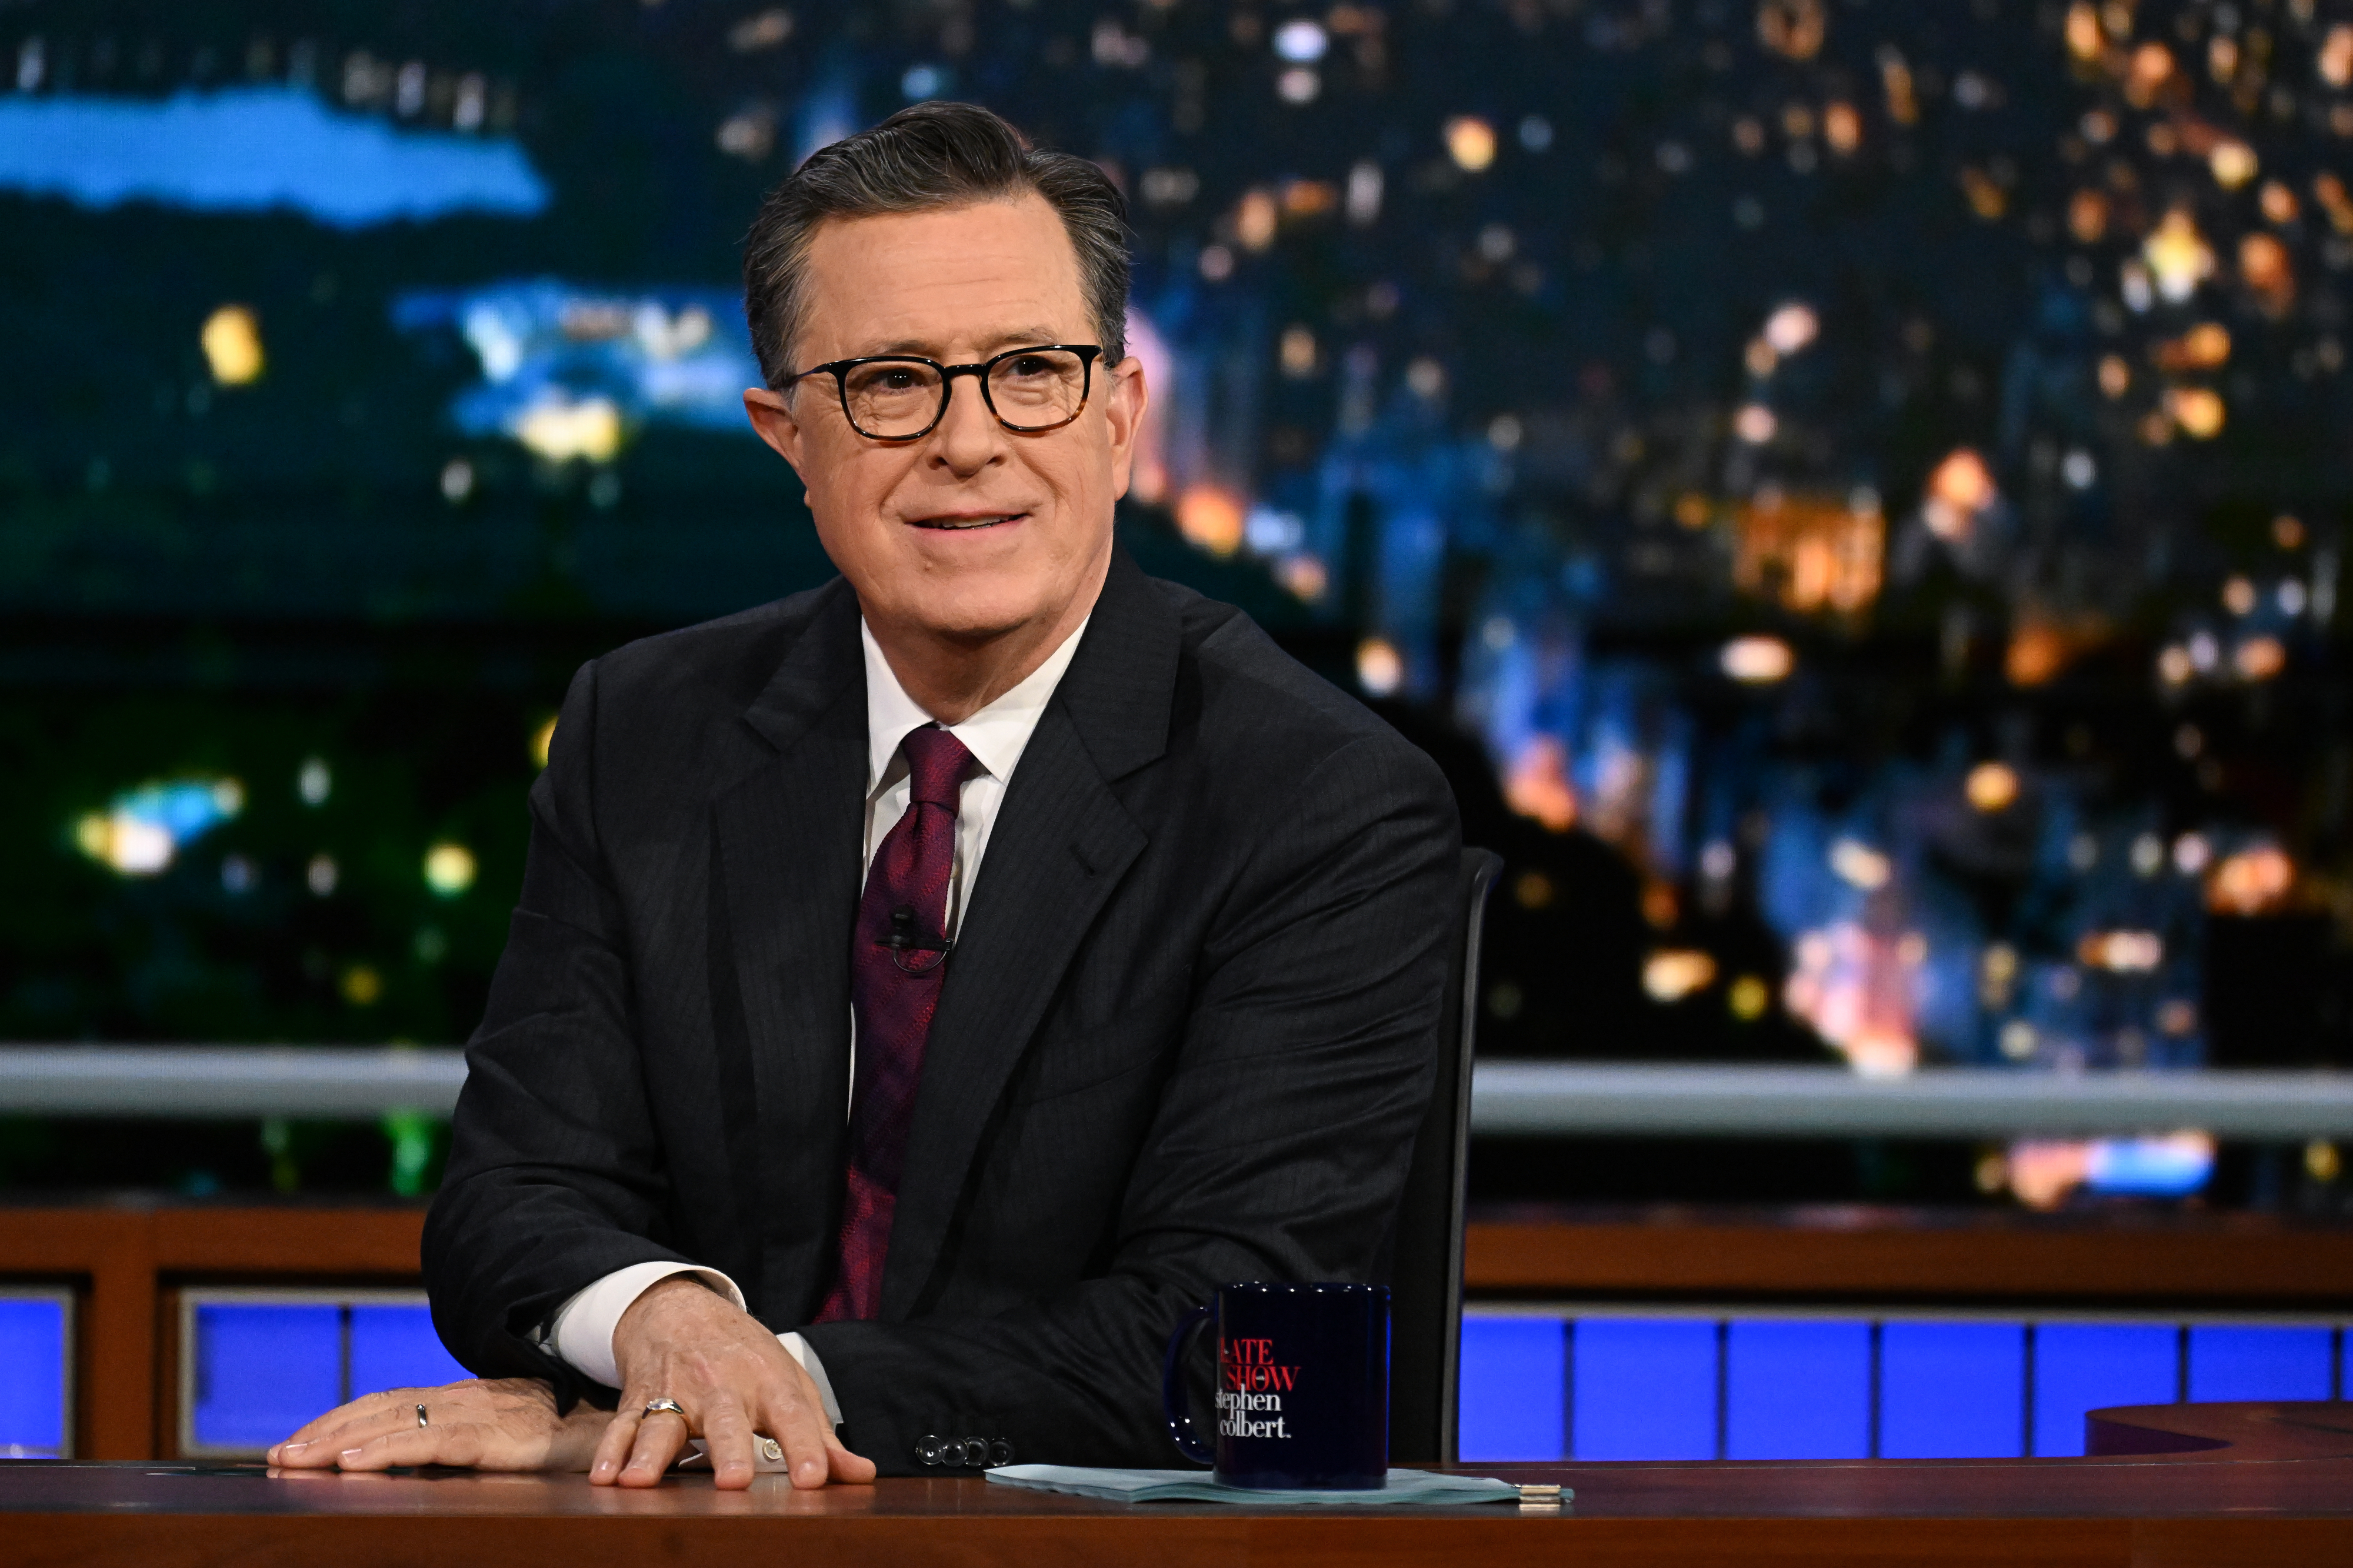 Stephen Colbert, in a dark suit and tie, sits at a desk with a cityscape background on &quot;The Late Show with Stephen Colbert.&quot;